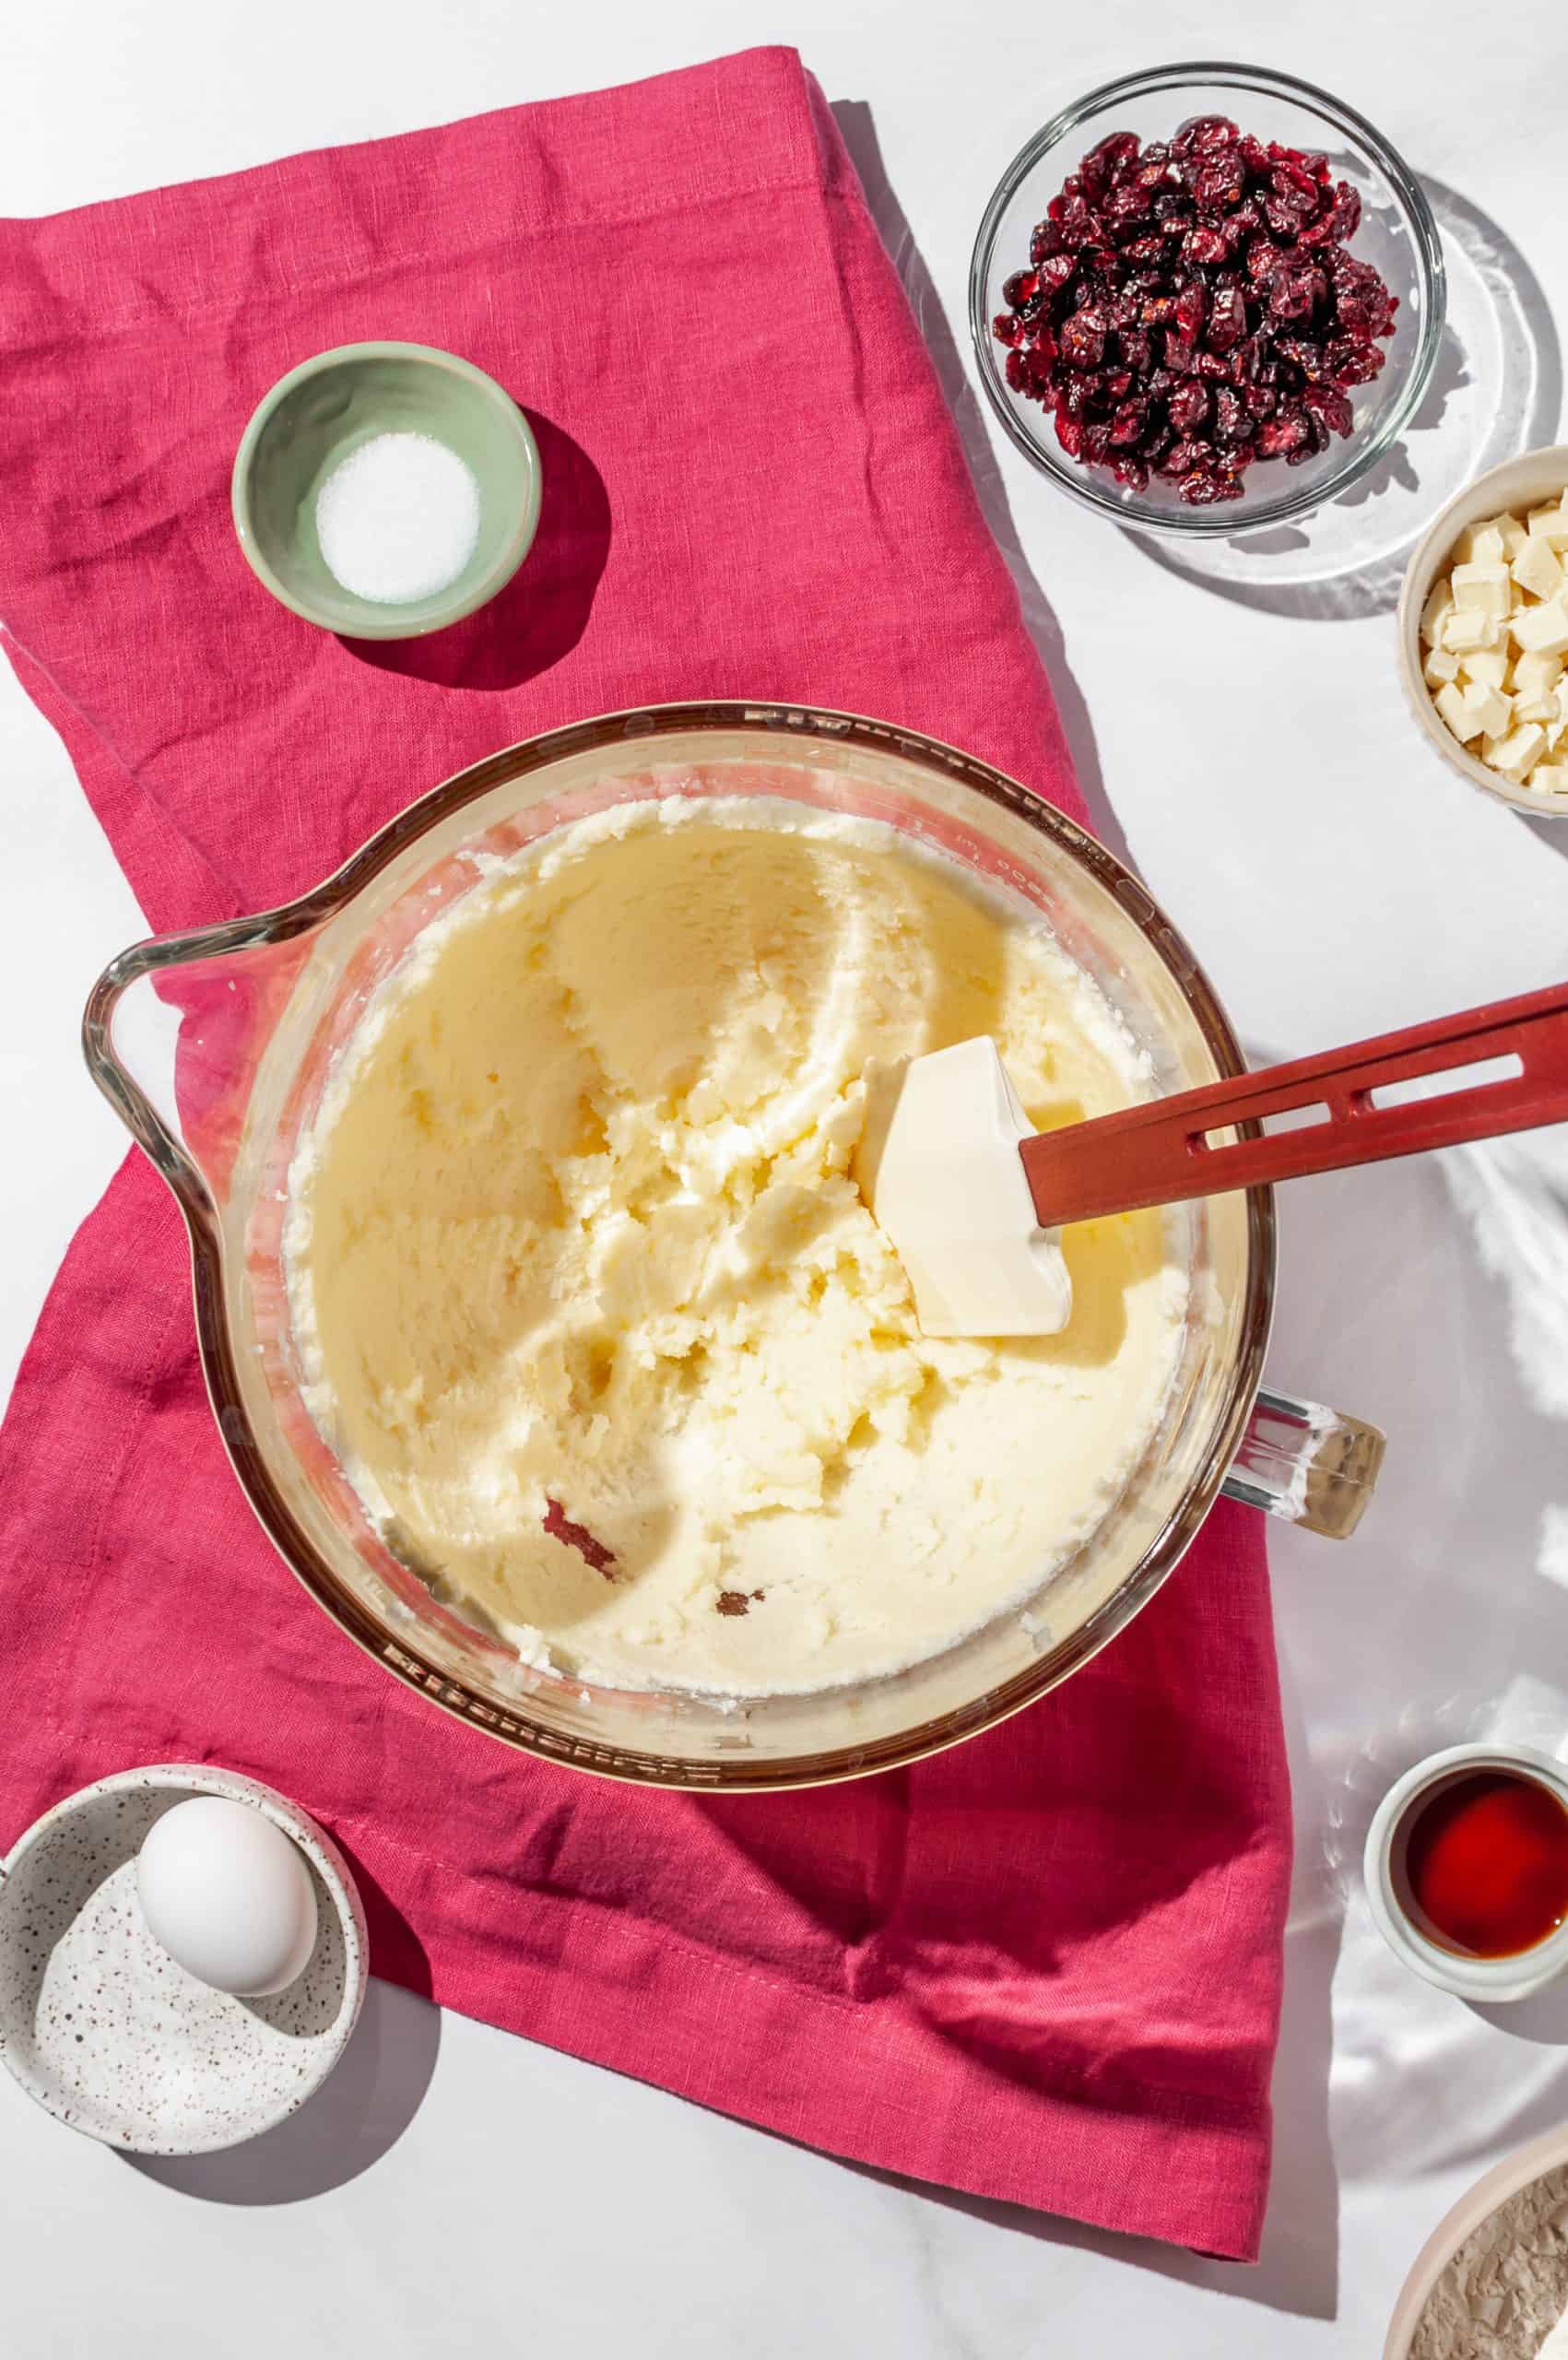 butter and sugar creamed together in a mixing bowl, dried cranberries and other shortbread ingredients on the side